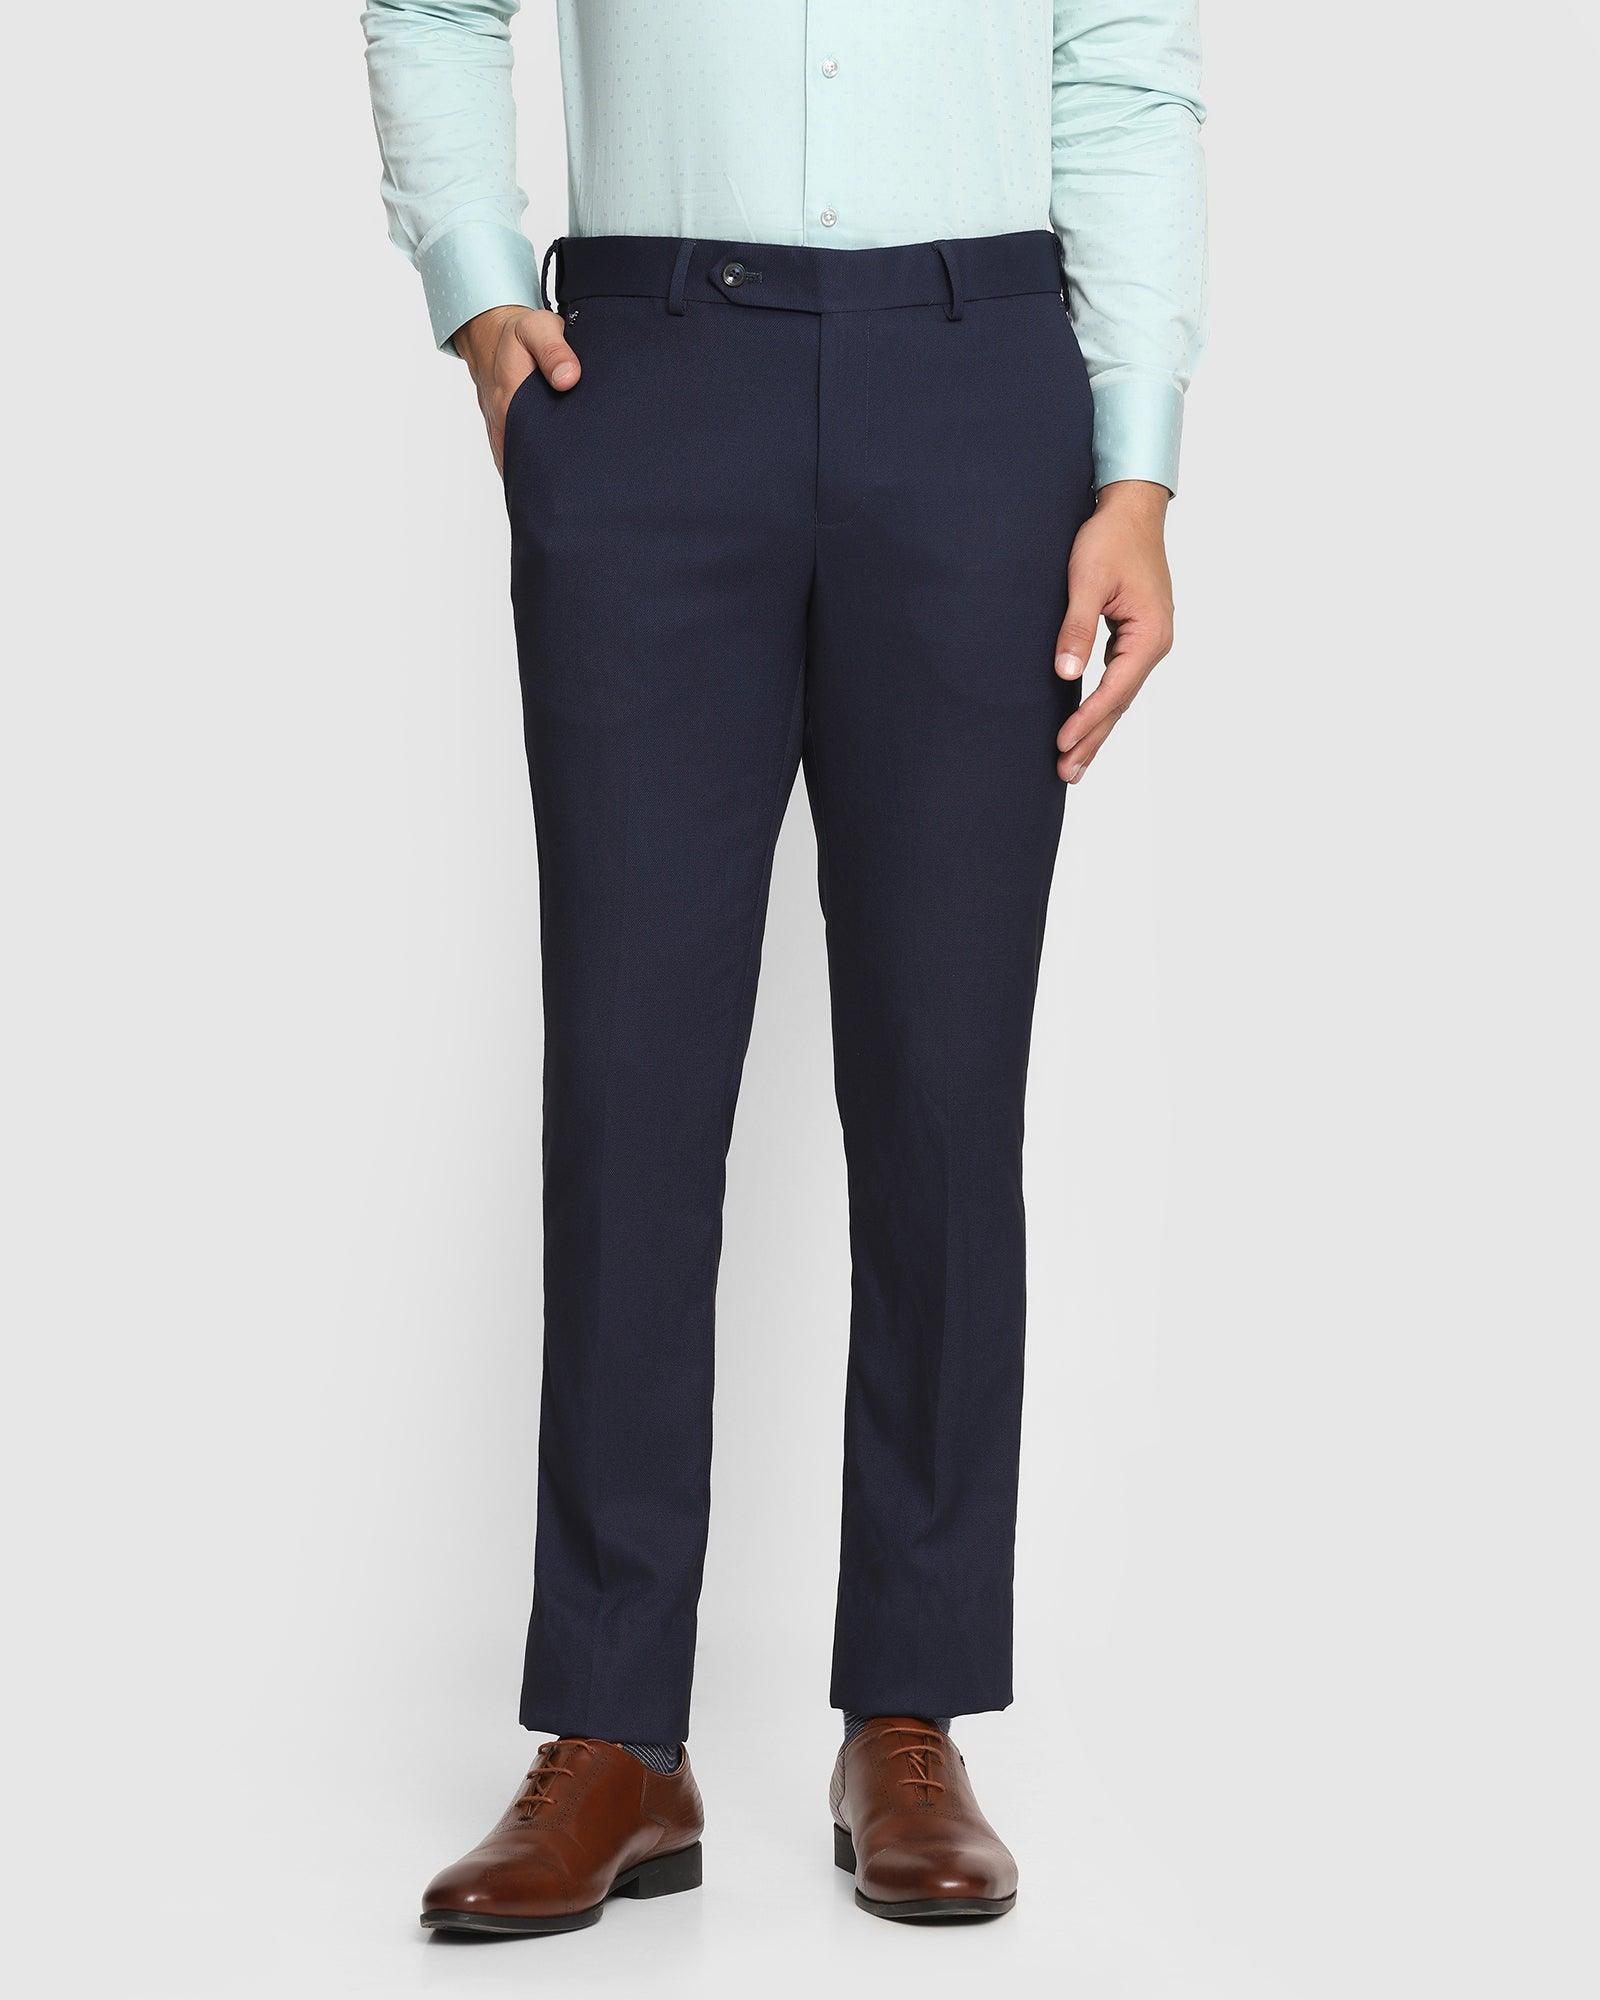 Slim Fit B-91 Formal Navy Textured Trouser - Cairon